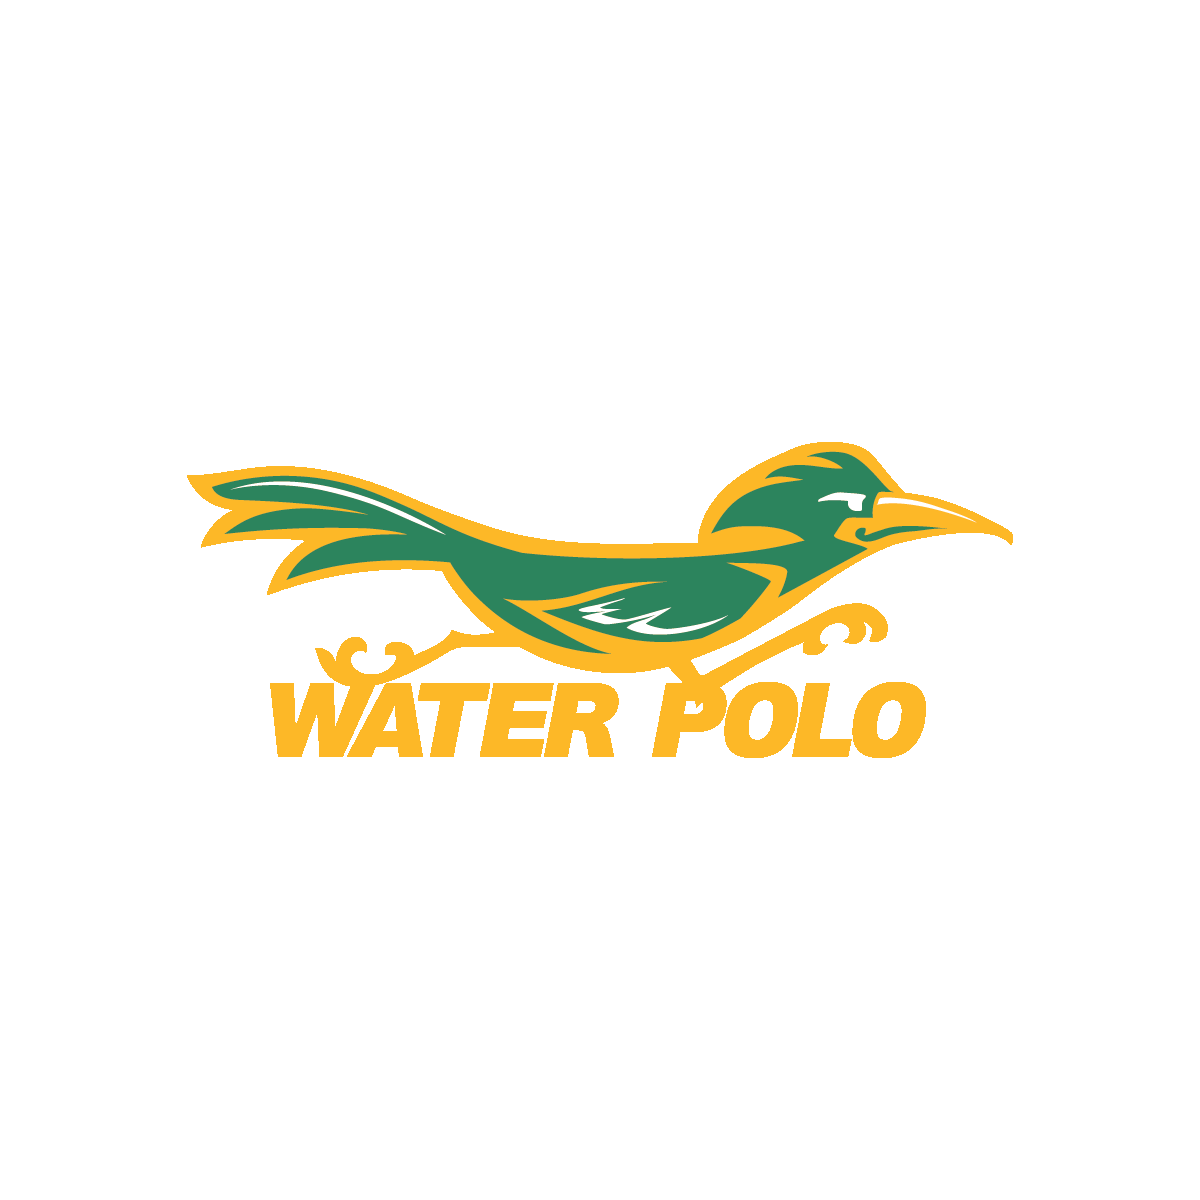 Water Polo mascot - yellow text